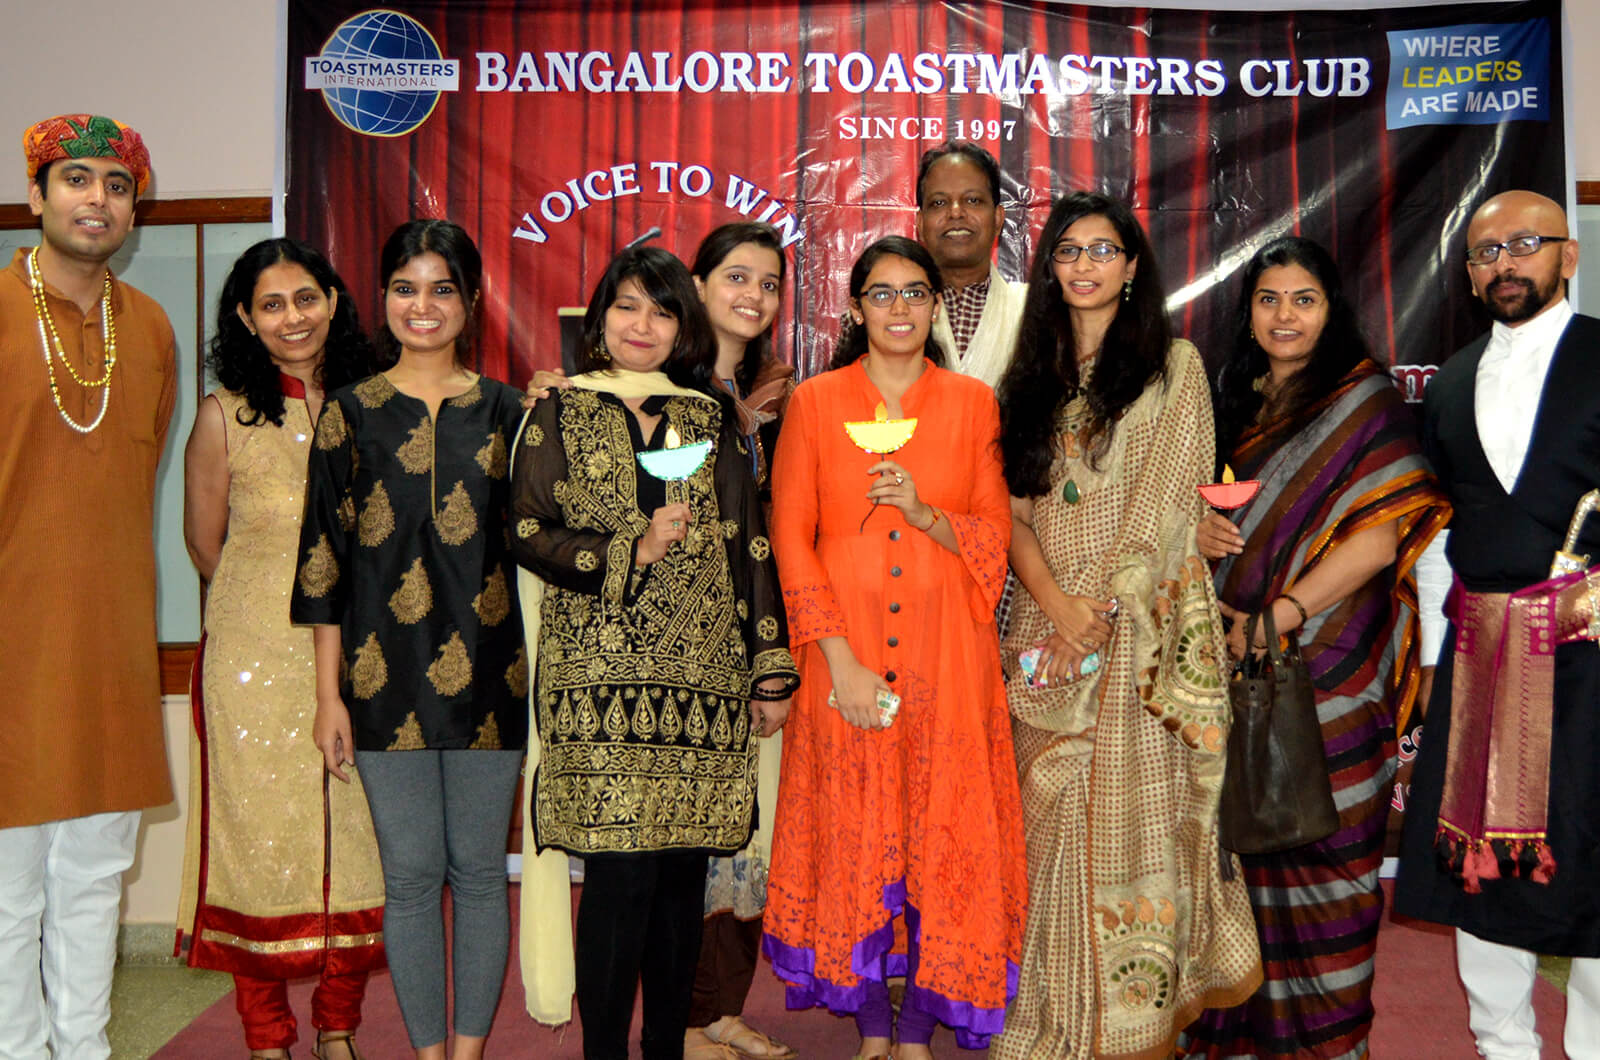 Members of the Bangalore Toastmasters club donned traditional Indian dress during their weekly meeting to celebrate Diwali festival.